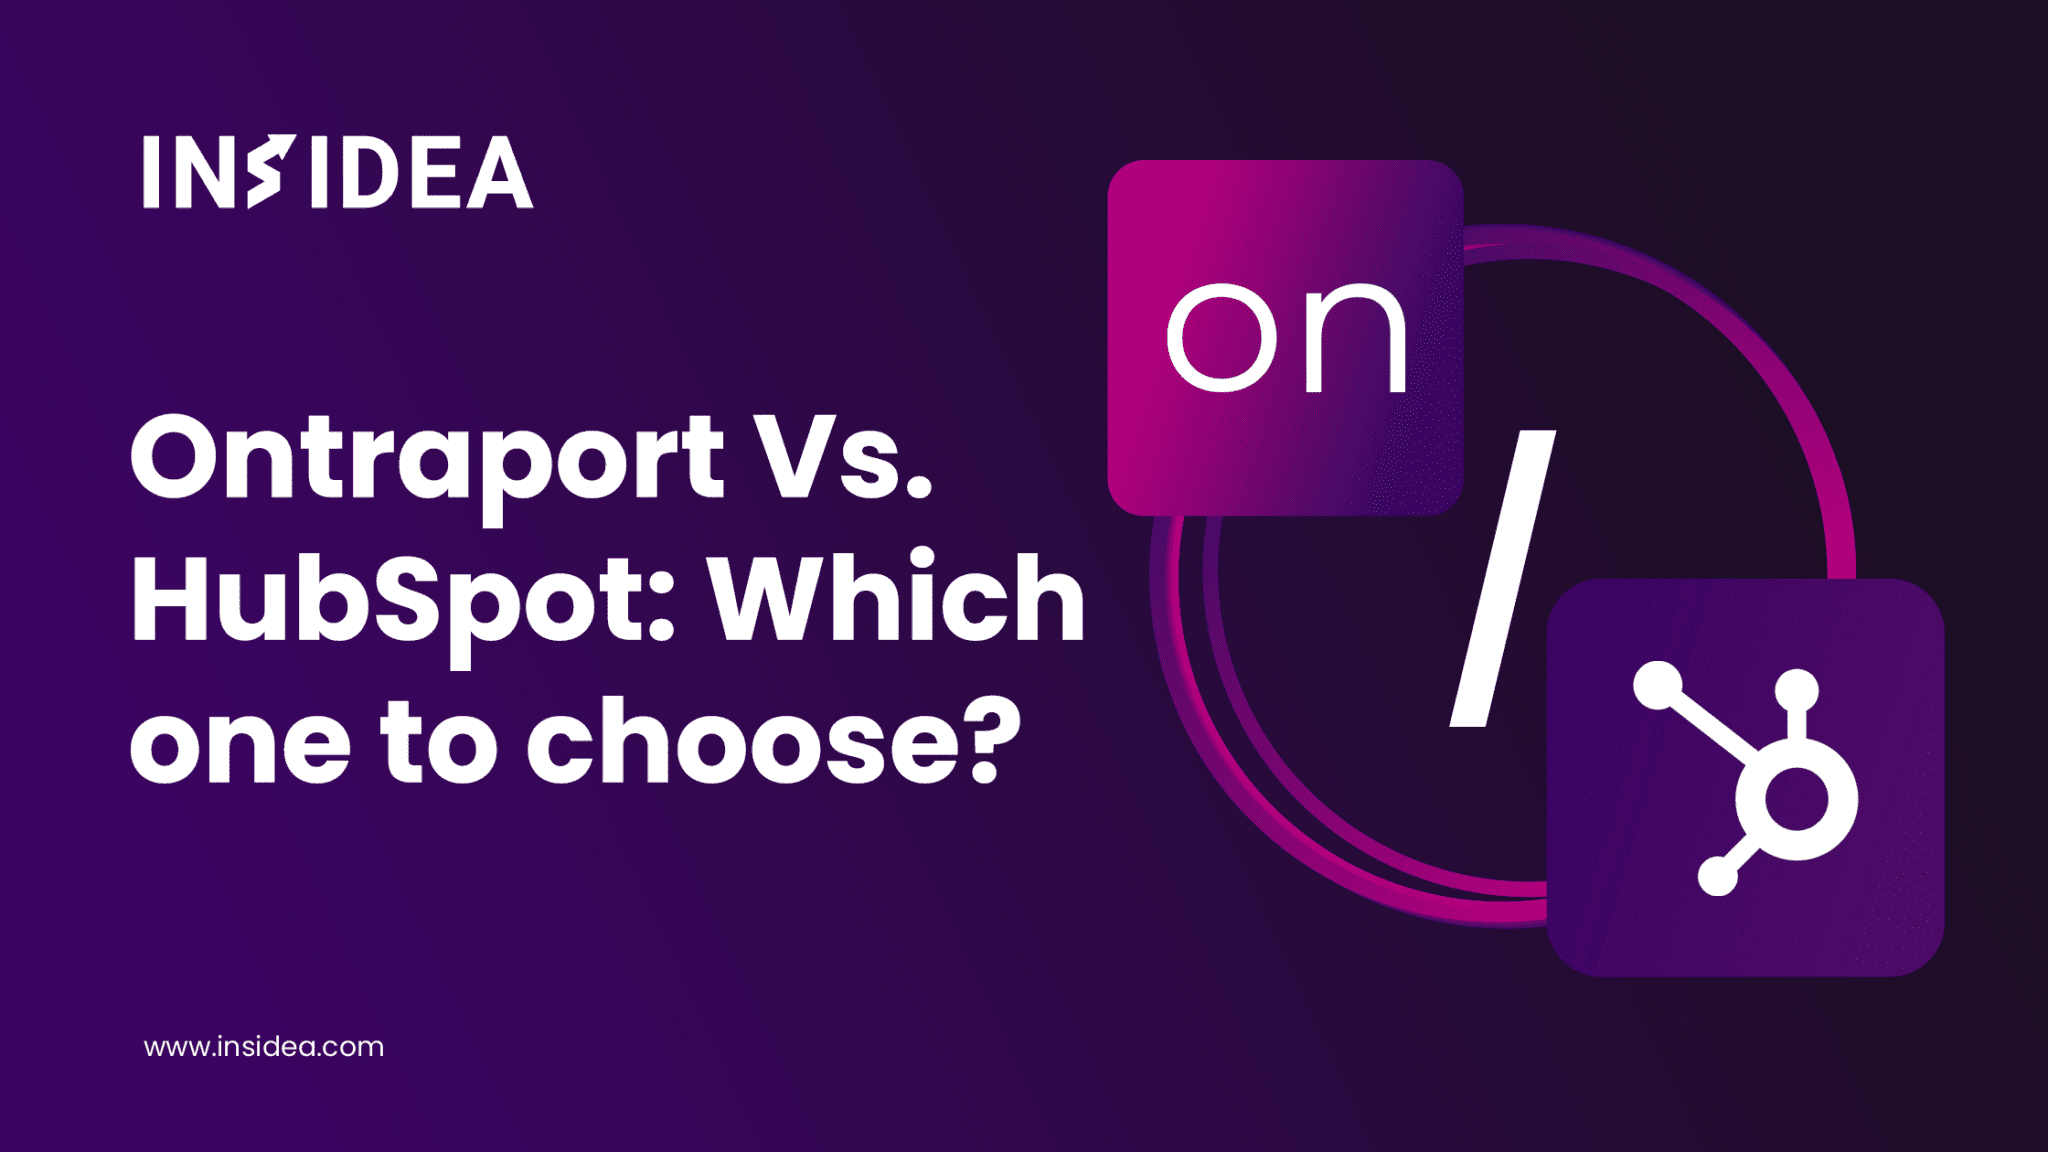 OntraPort Vs HubSpot: Which One To Choose? - INSIDEA